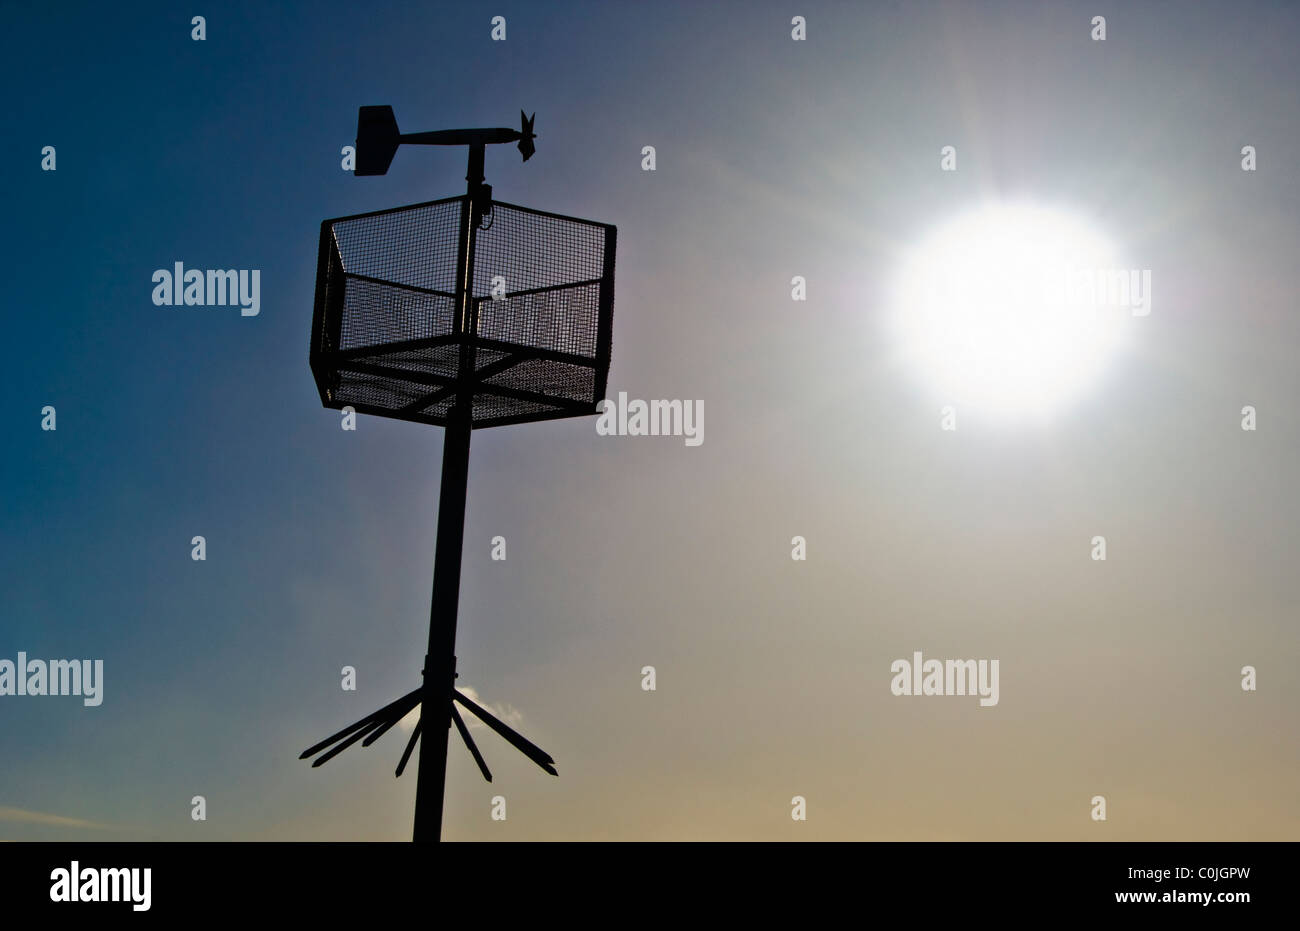 An Anemometer measuring wind speed set against a bright sun. Stock Photo